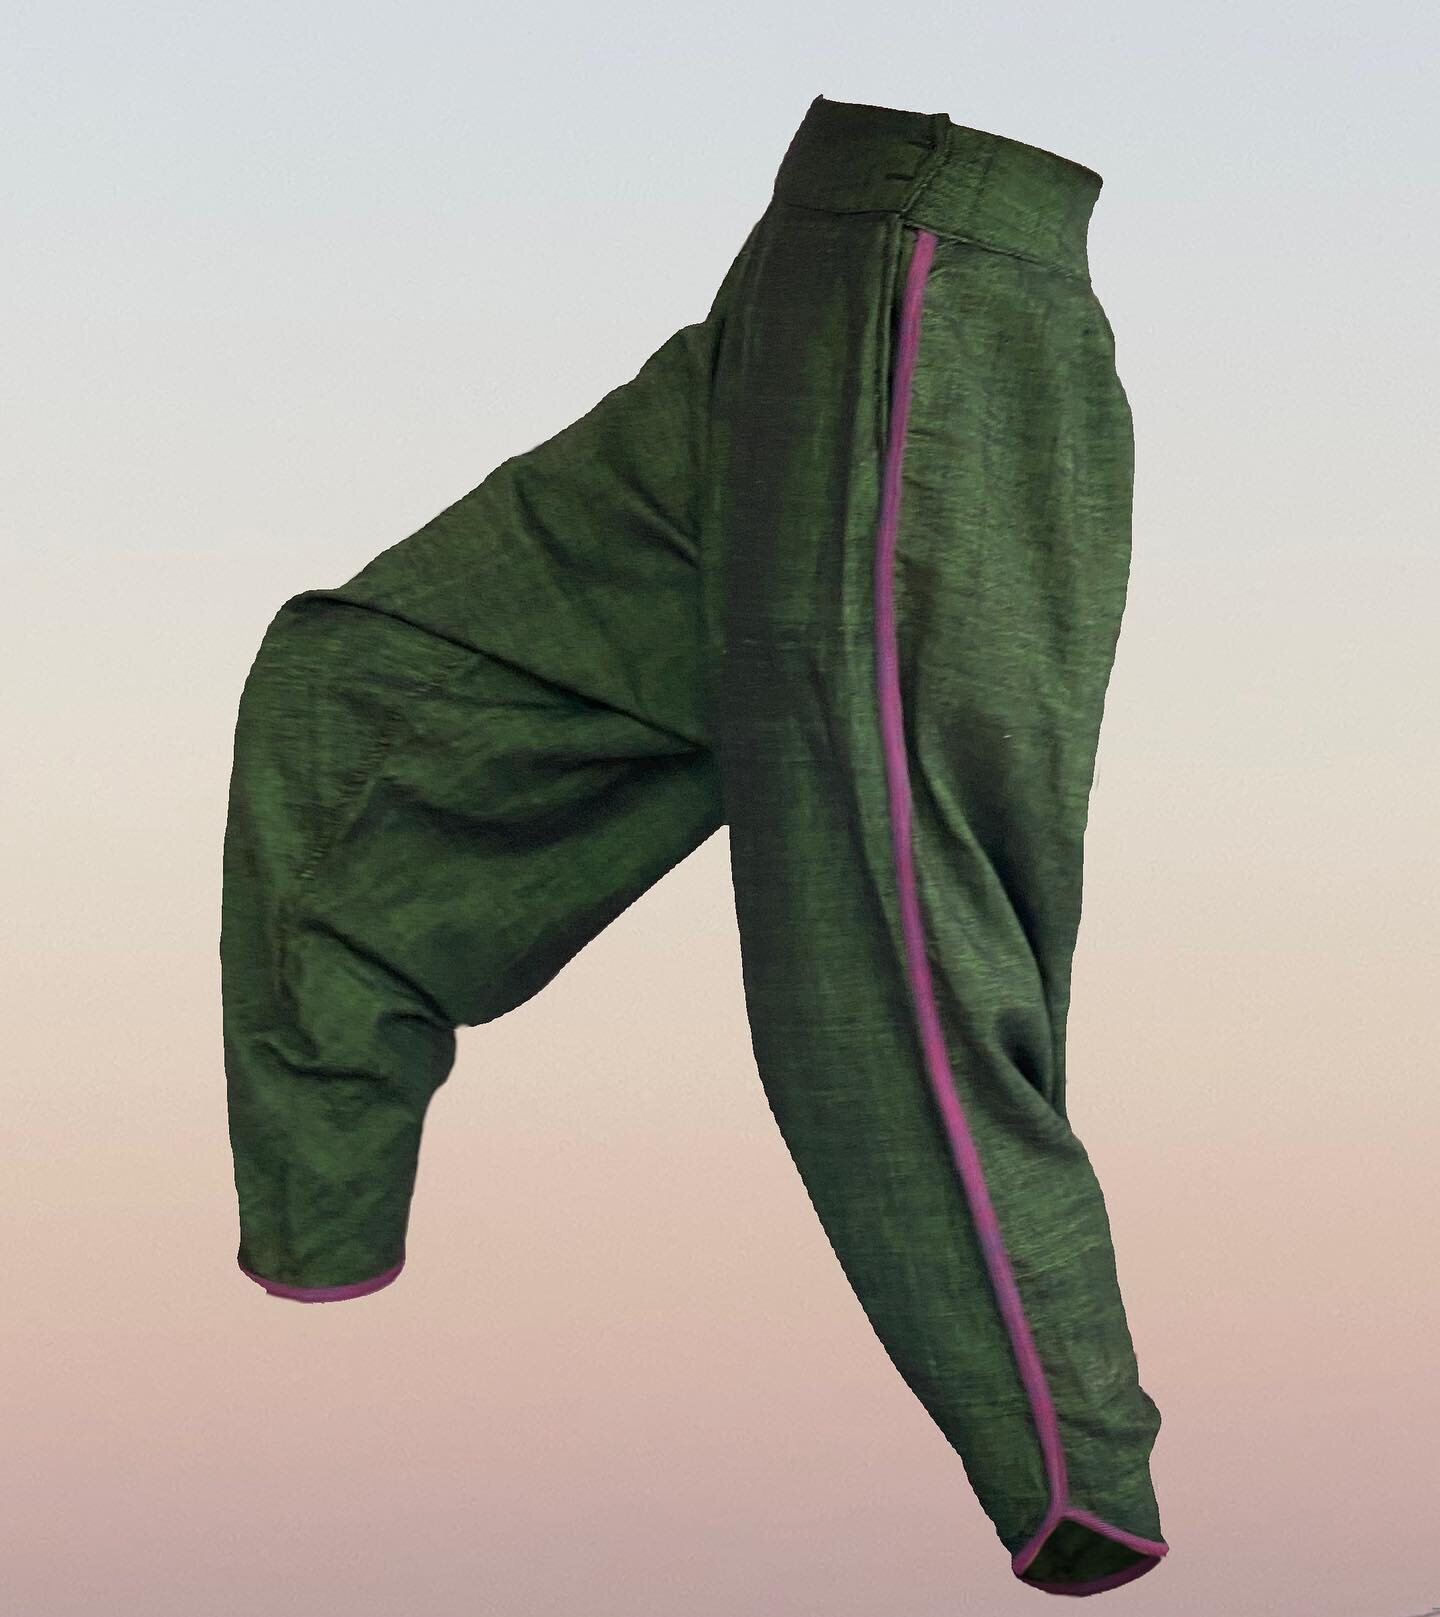 Harem Pants in Changeable Green

Available @thecanvasnyc @oculusnyc or made to measure on our website (in bio)